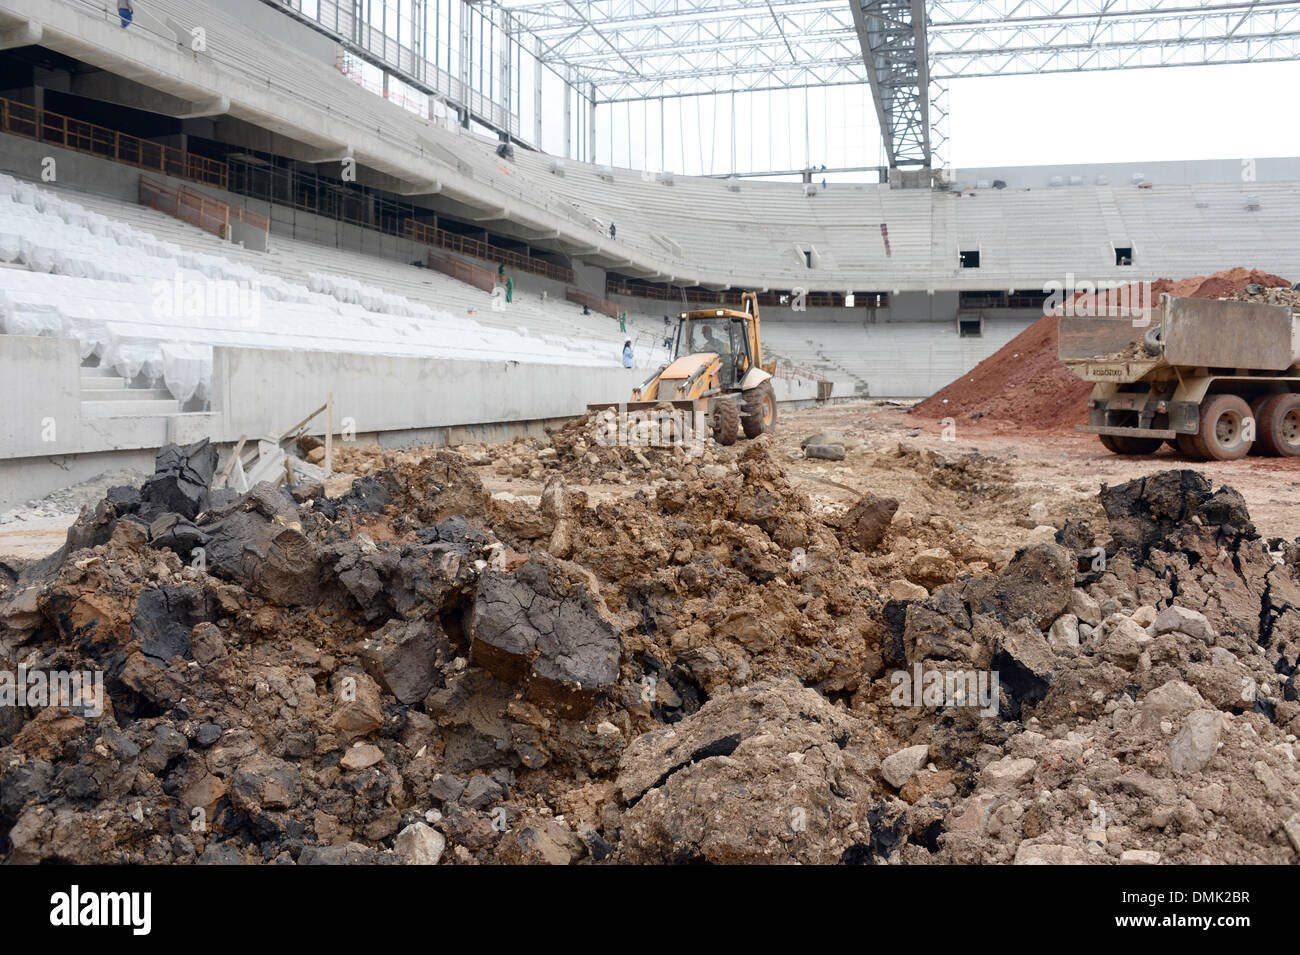 The soccer pitch which is currently under construction in the stadium 'Arena da Baixada' in Curitiba, Brazil, 14 December 2013. The Arena de Baixada is one of the stadiums for the FIFA World Cup 2014 in Brazil. Photo: Marcus Brandt/dpa Stock Photo